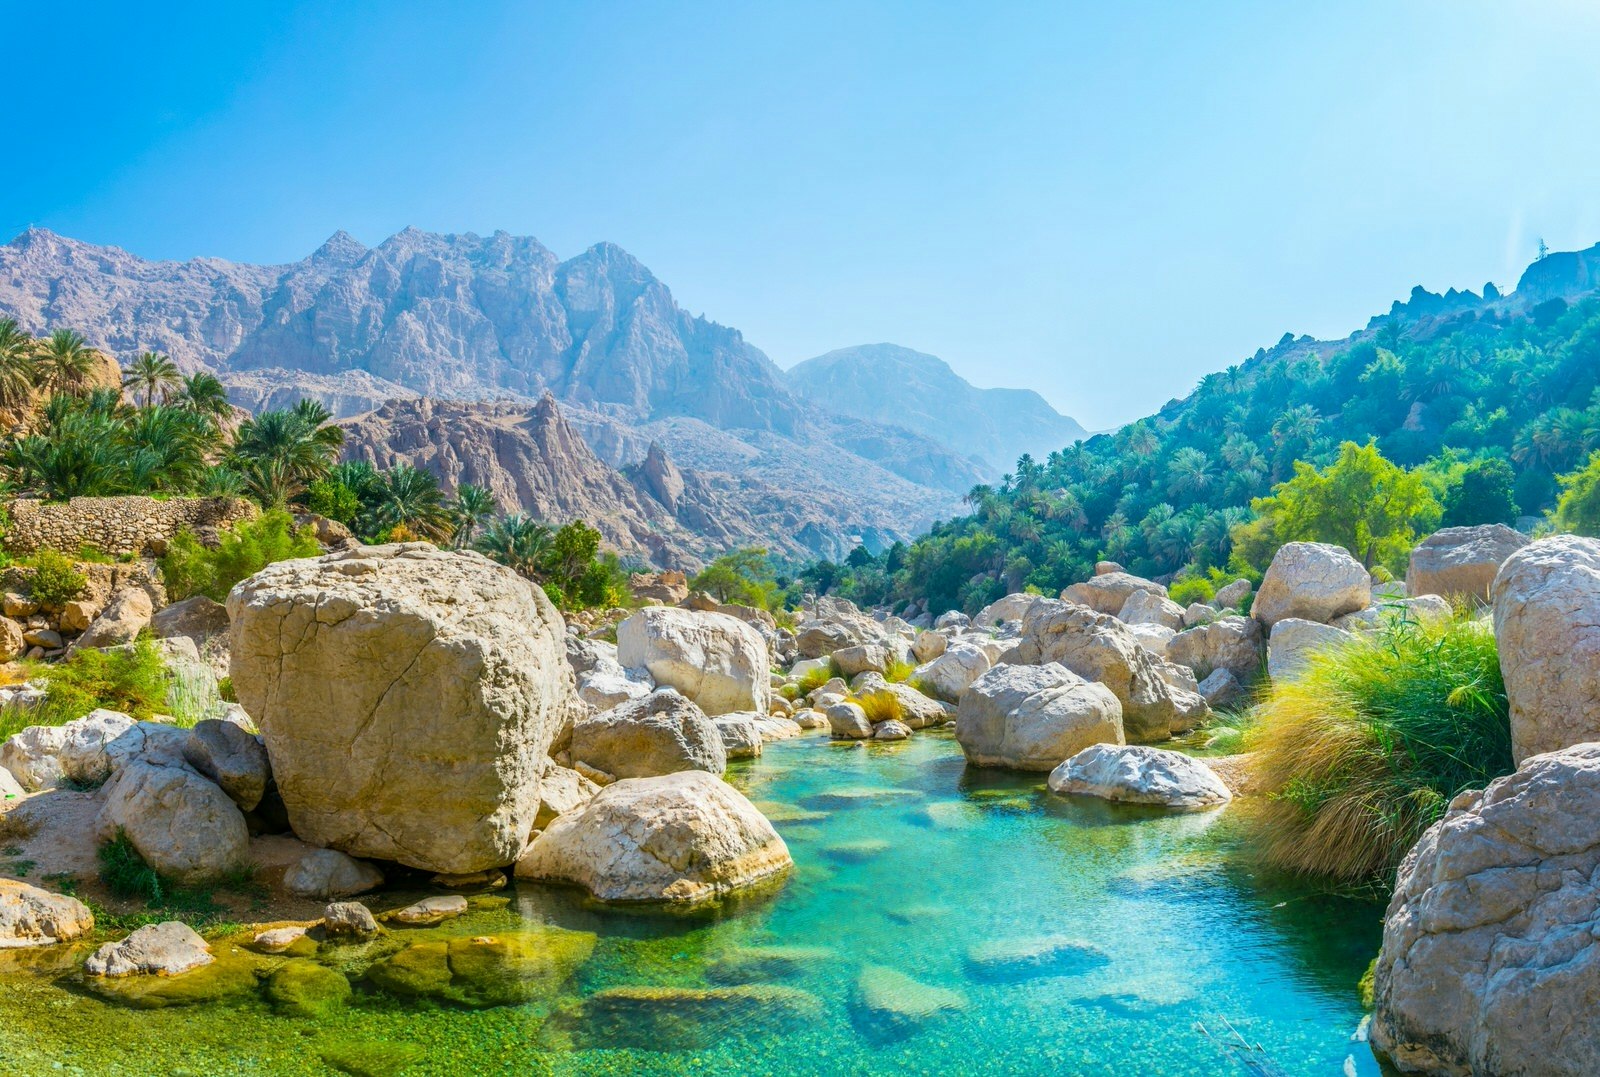 Lagoon with turqoise water in Wadi Tiwi in Oman. Image by trabantos / Shutterstock